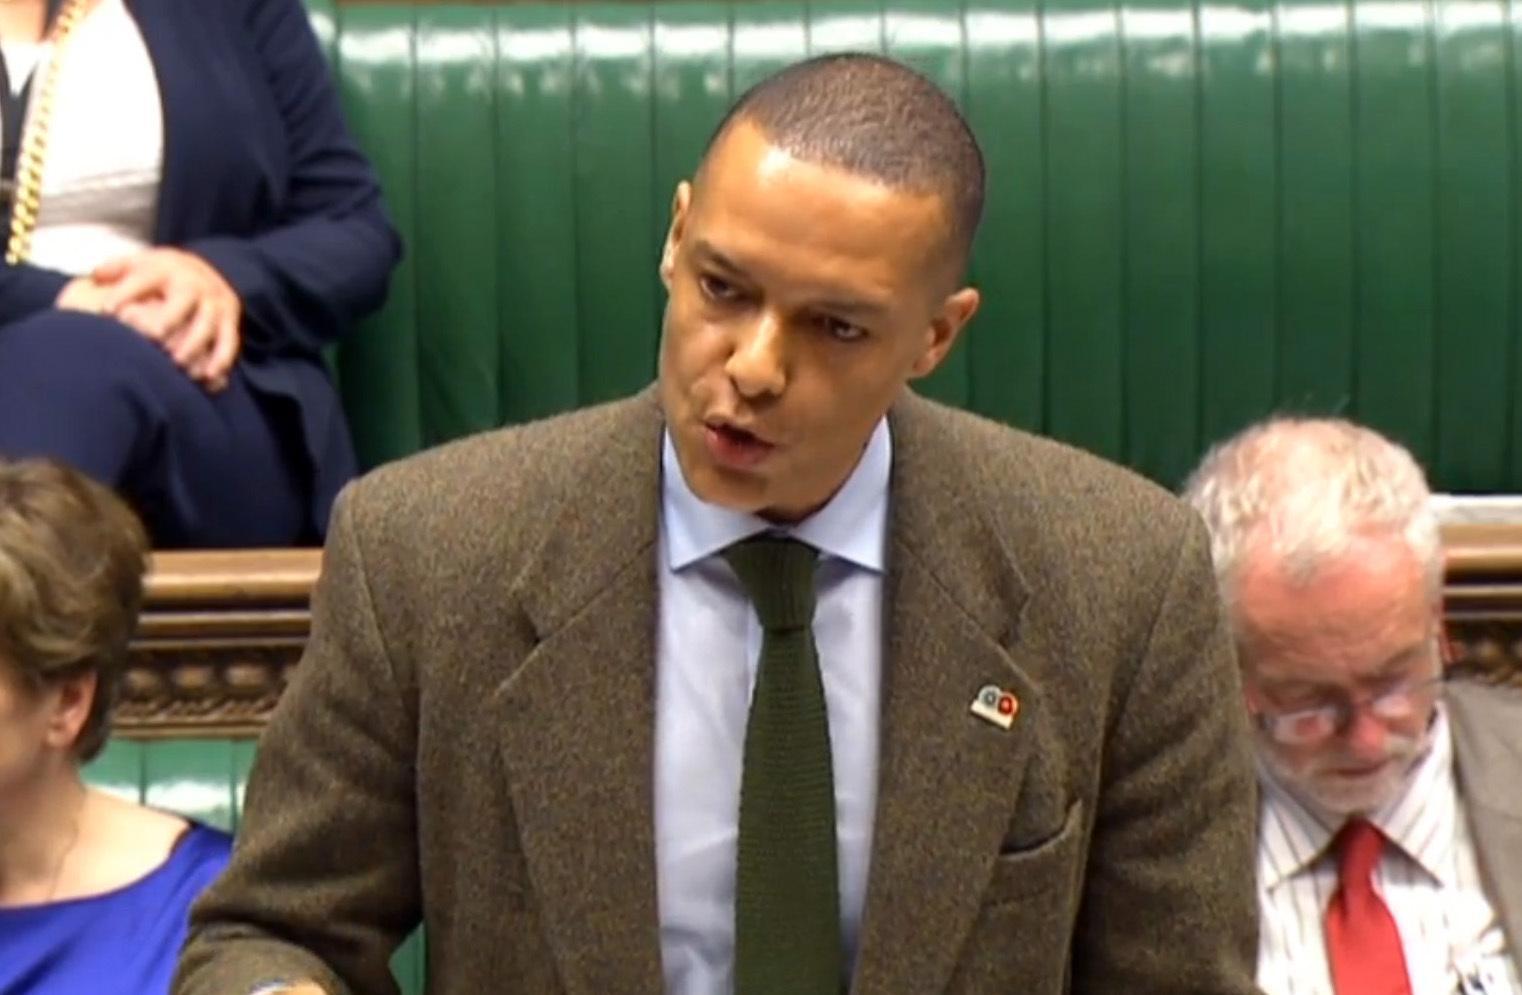 Clive Lewis is Labour's defence spokesperson in the House of Commons